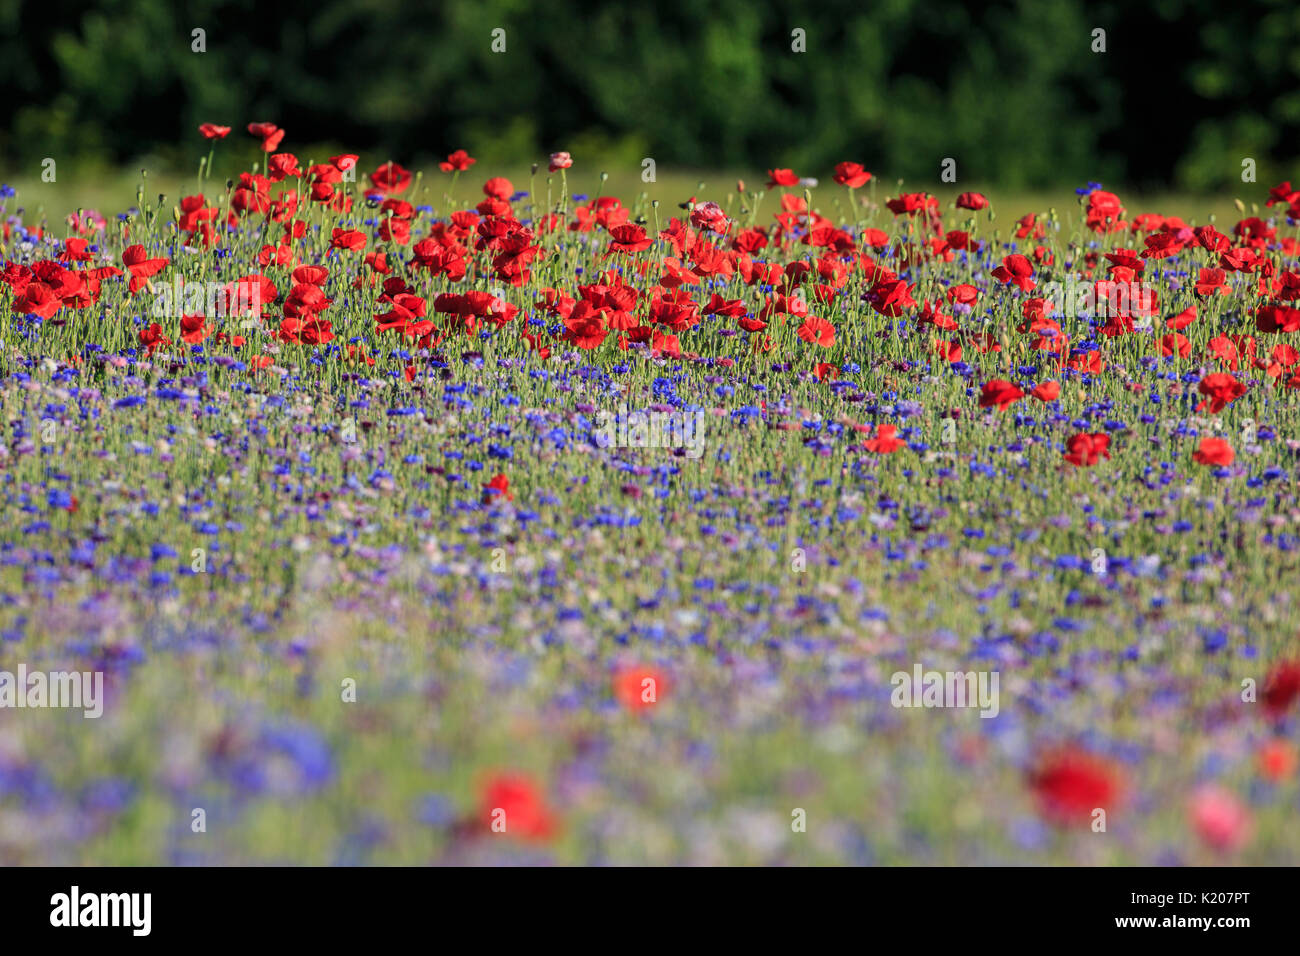 Red poppies in a field, with blue bachelor's buttons in the foreground. Stock Photo